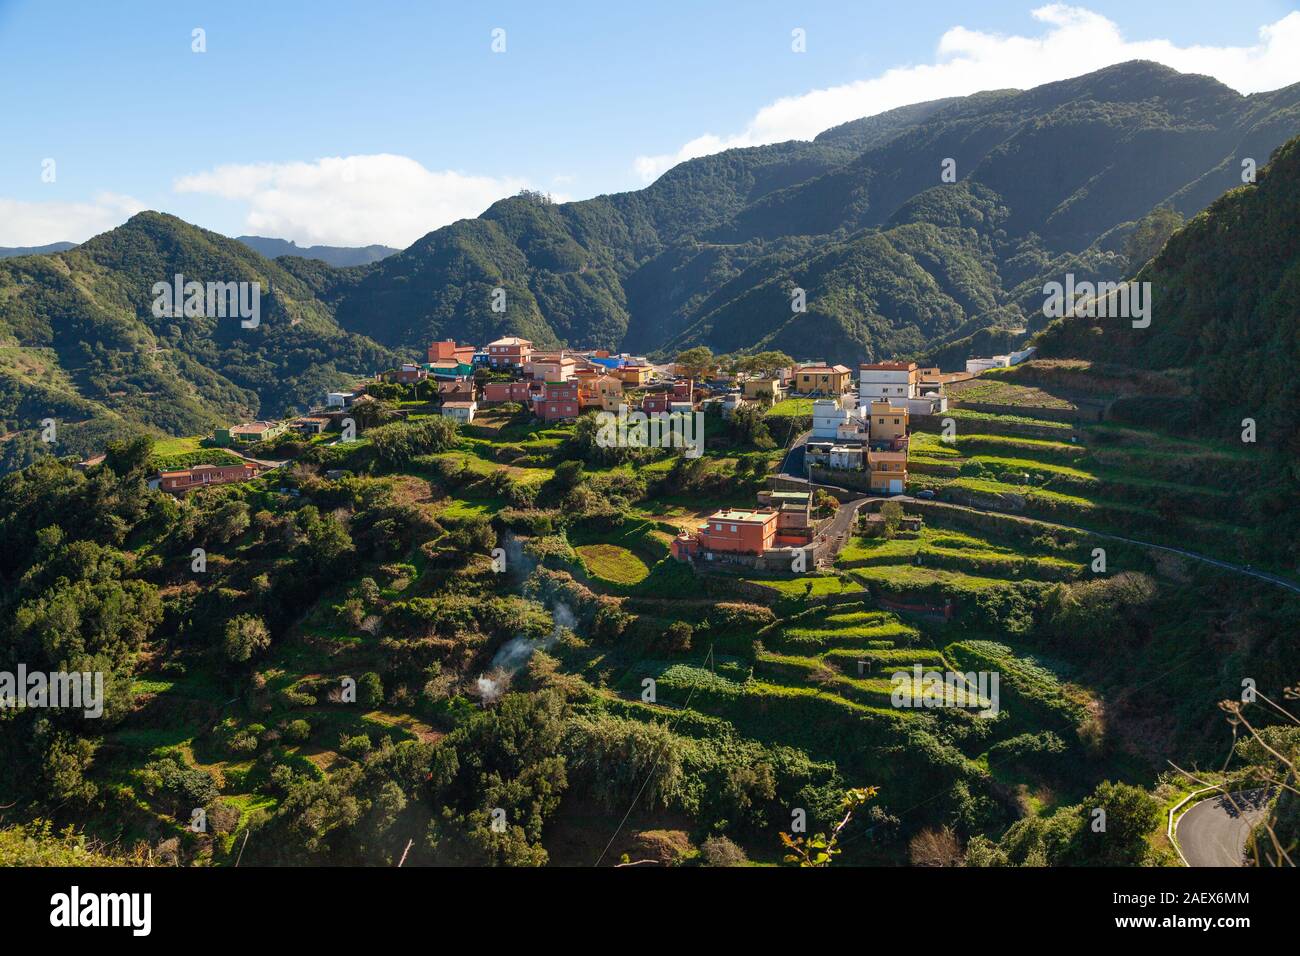 Terraced fields near the village of Las Carboneras in the Anaga mountains, Tenerife Stock Photo